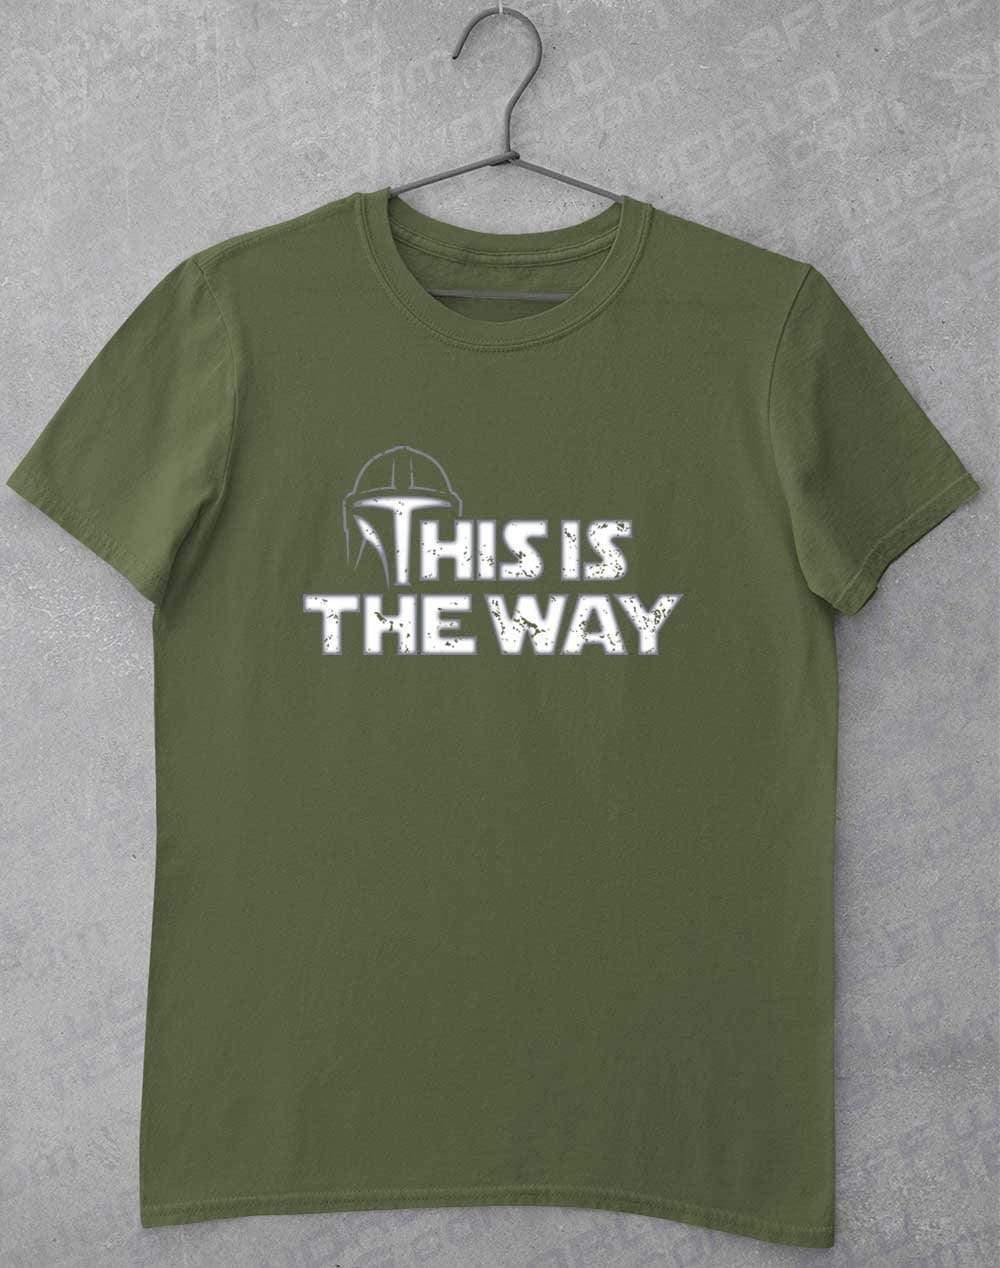 This is the Way - T-Shirt S / Military Green  - Off World Tees